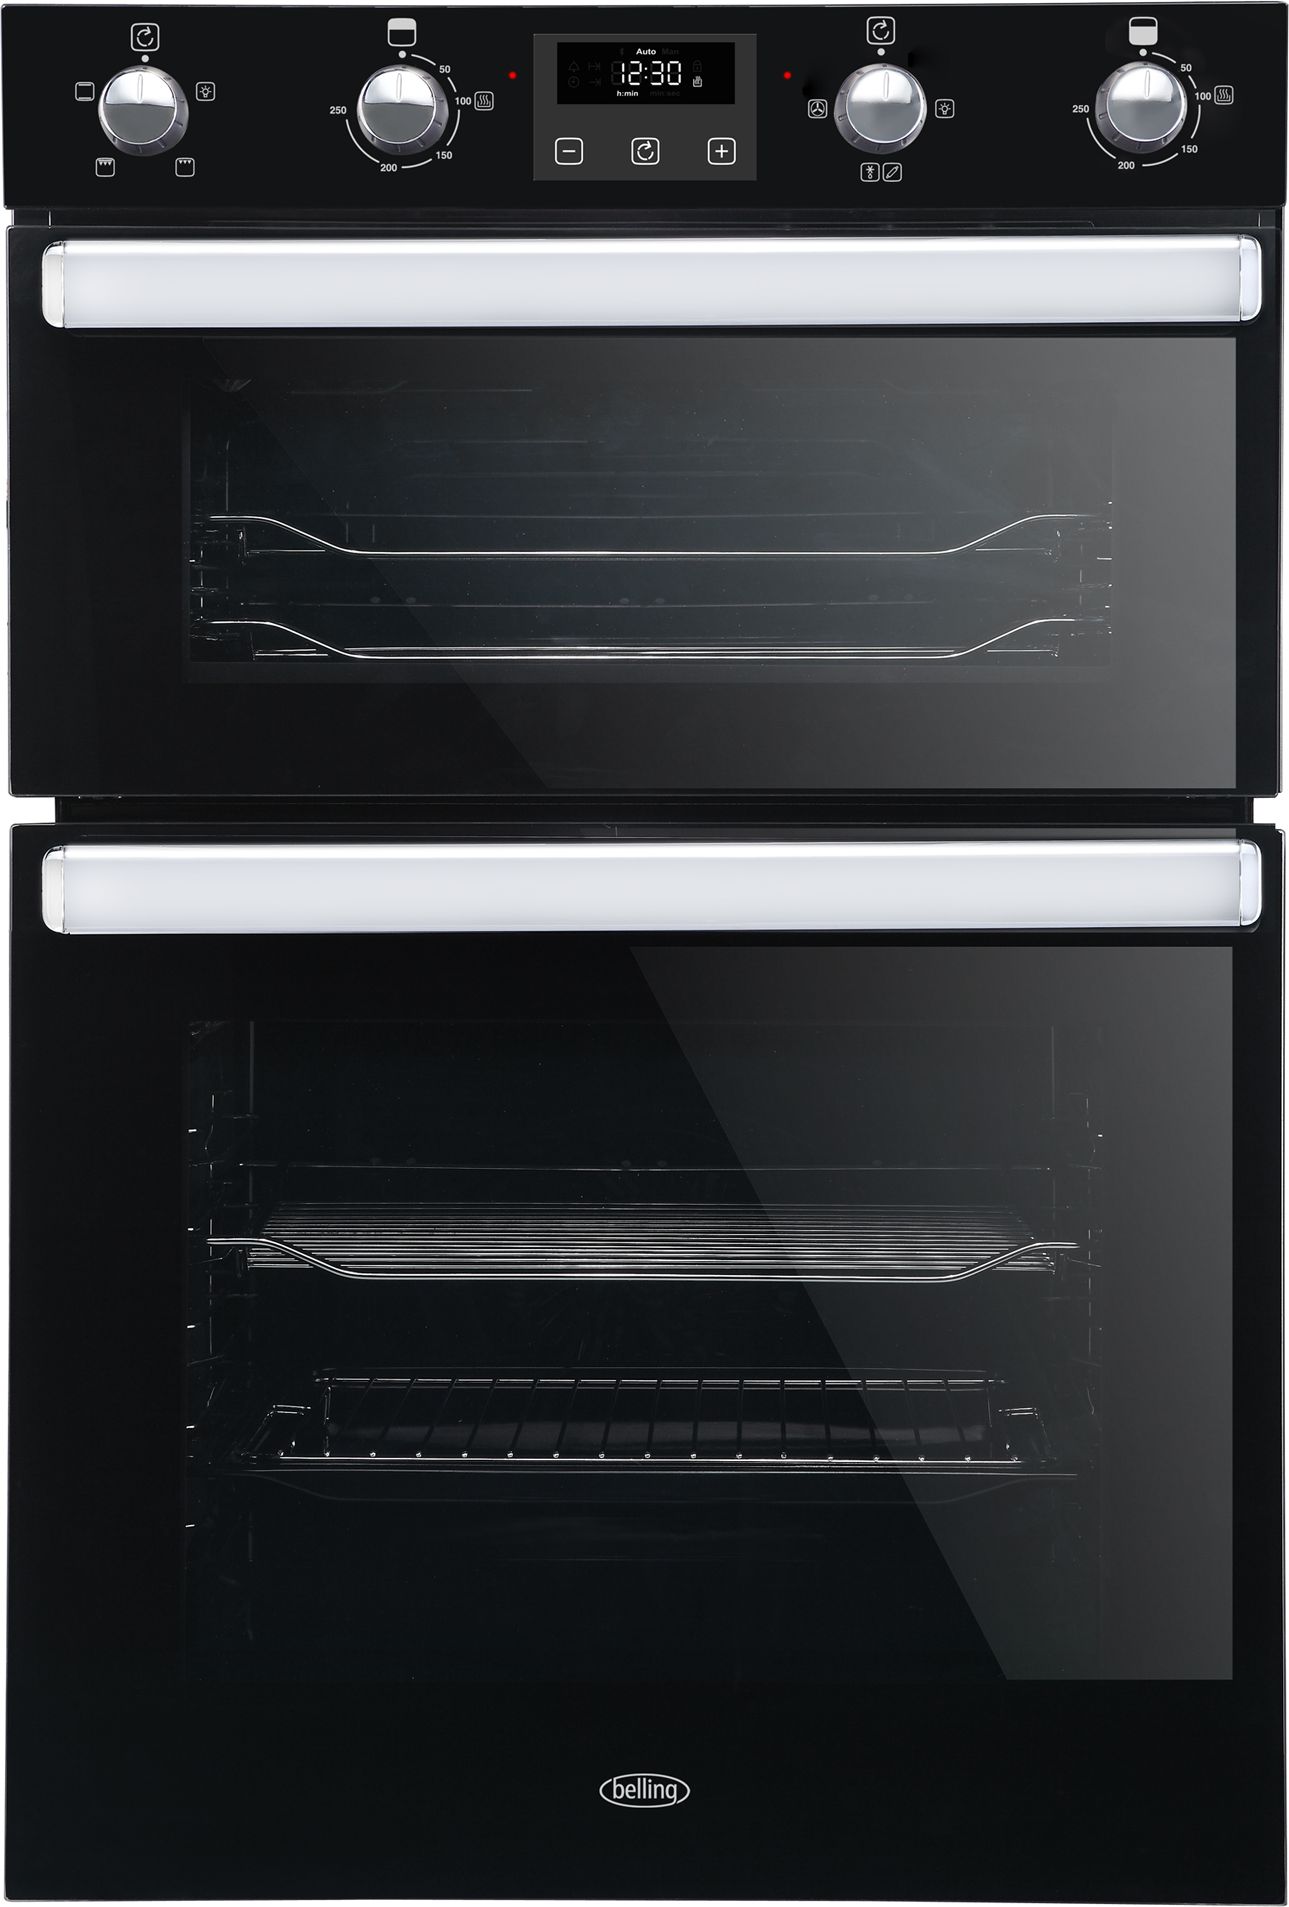 Belling BI902FP Built In Electric Double Oven - Black - A/A Rated, Black